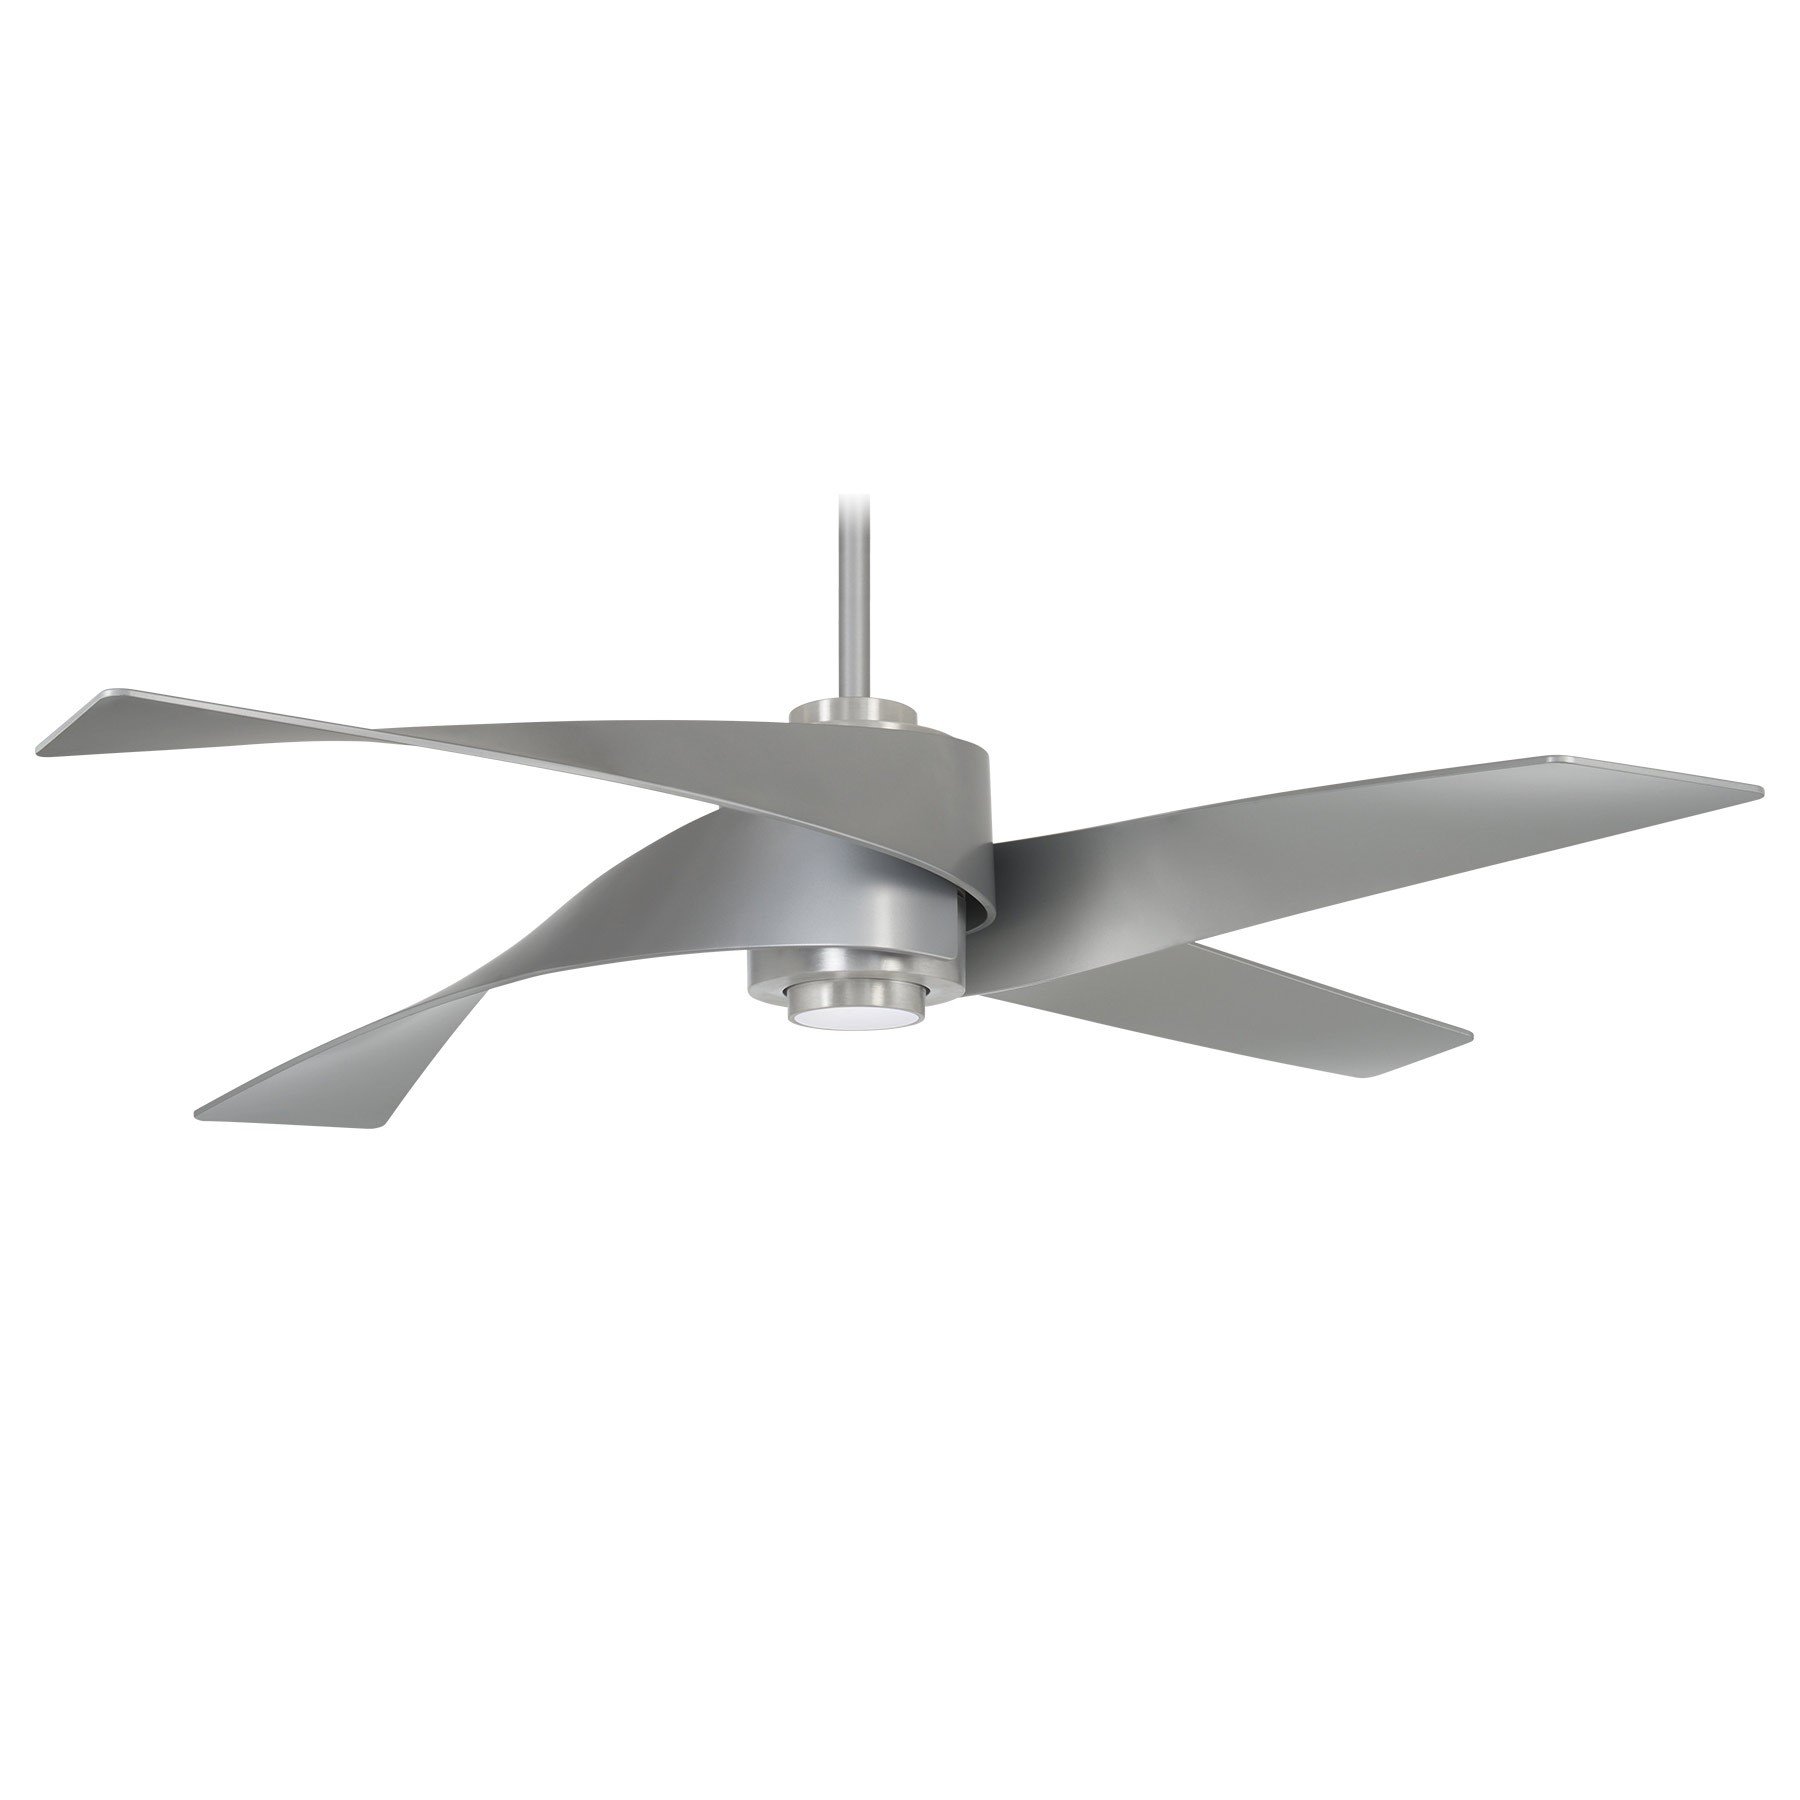 Minka Aire Artemis Iv Ceiling Fan With